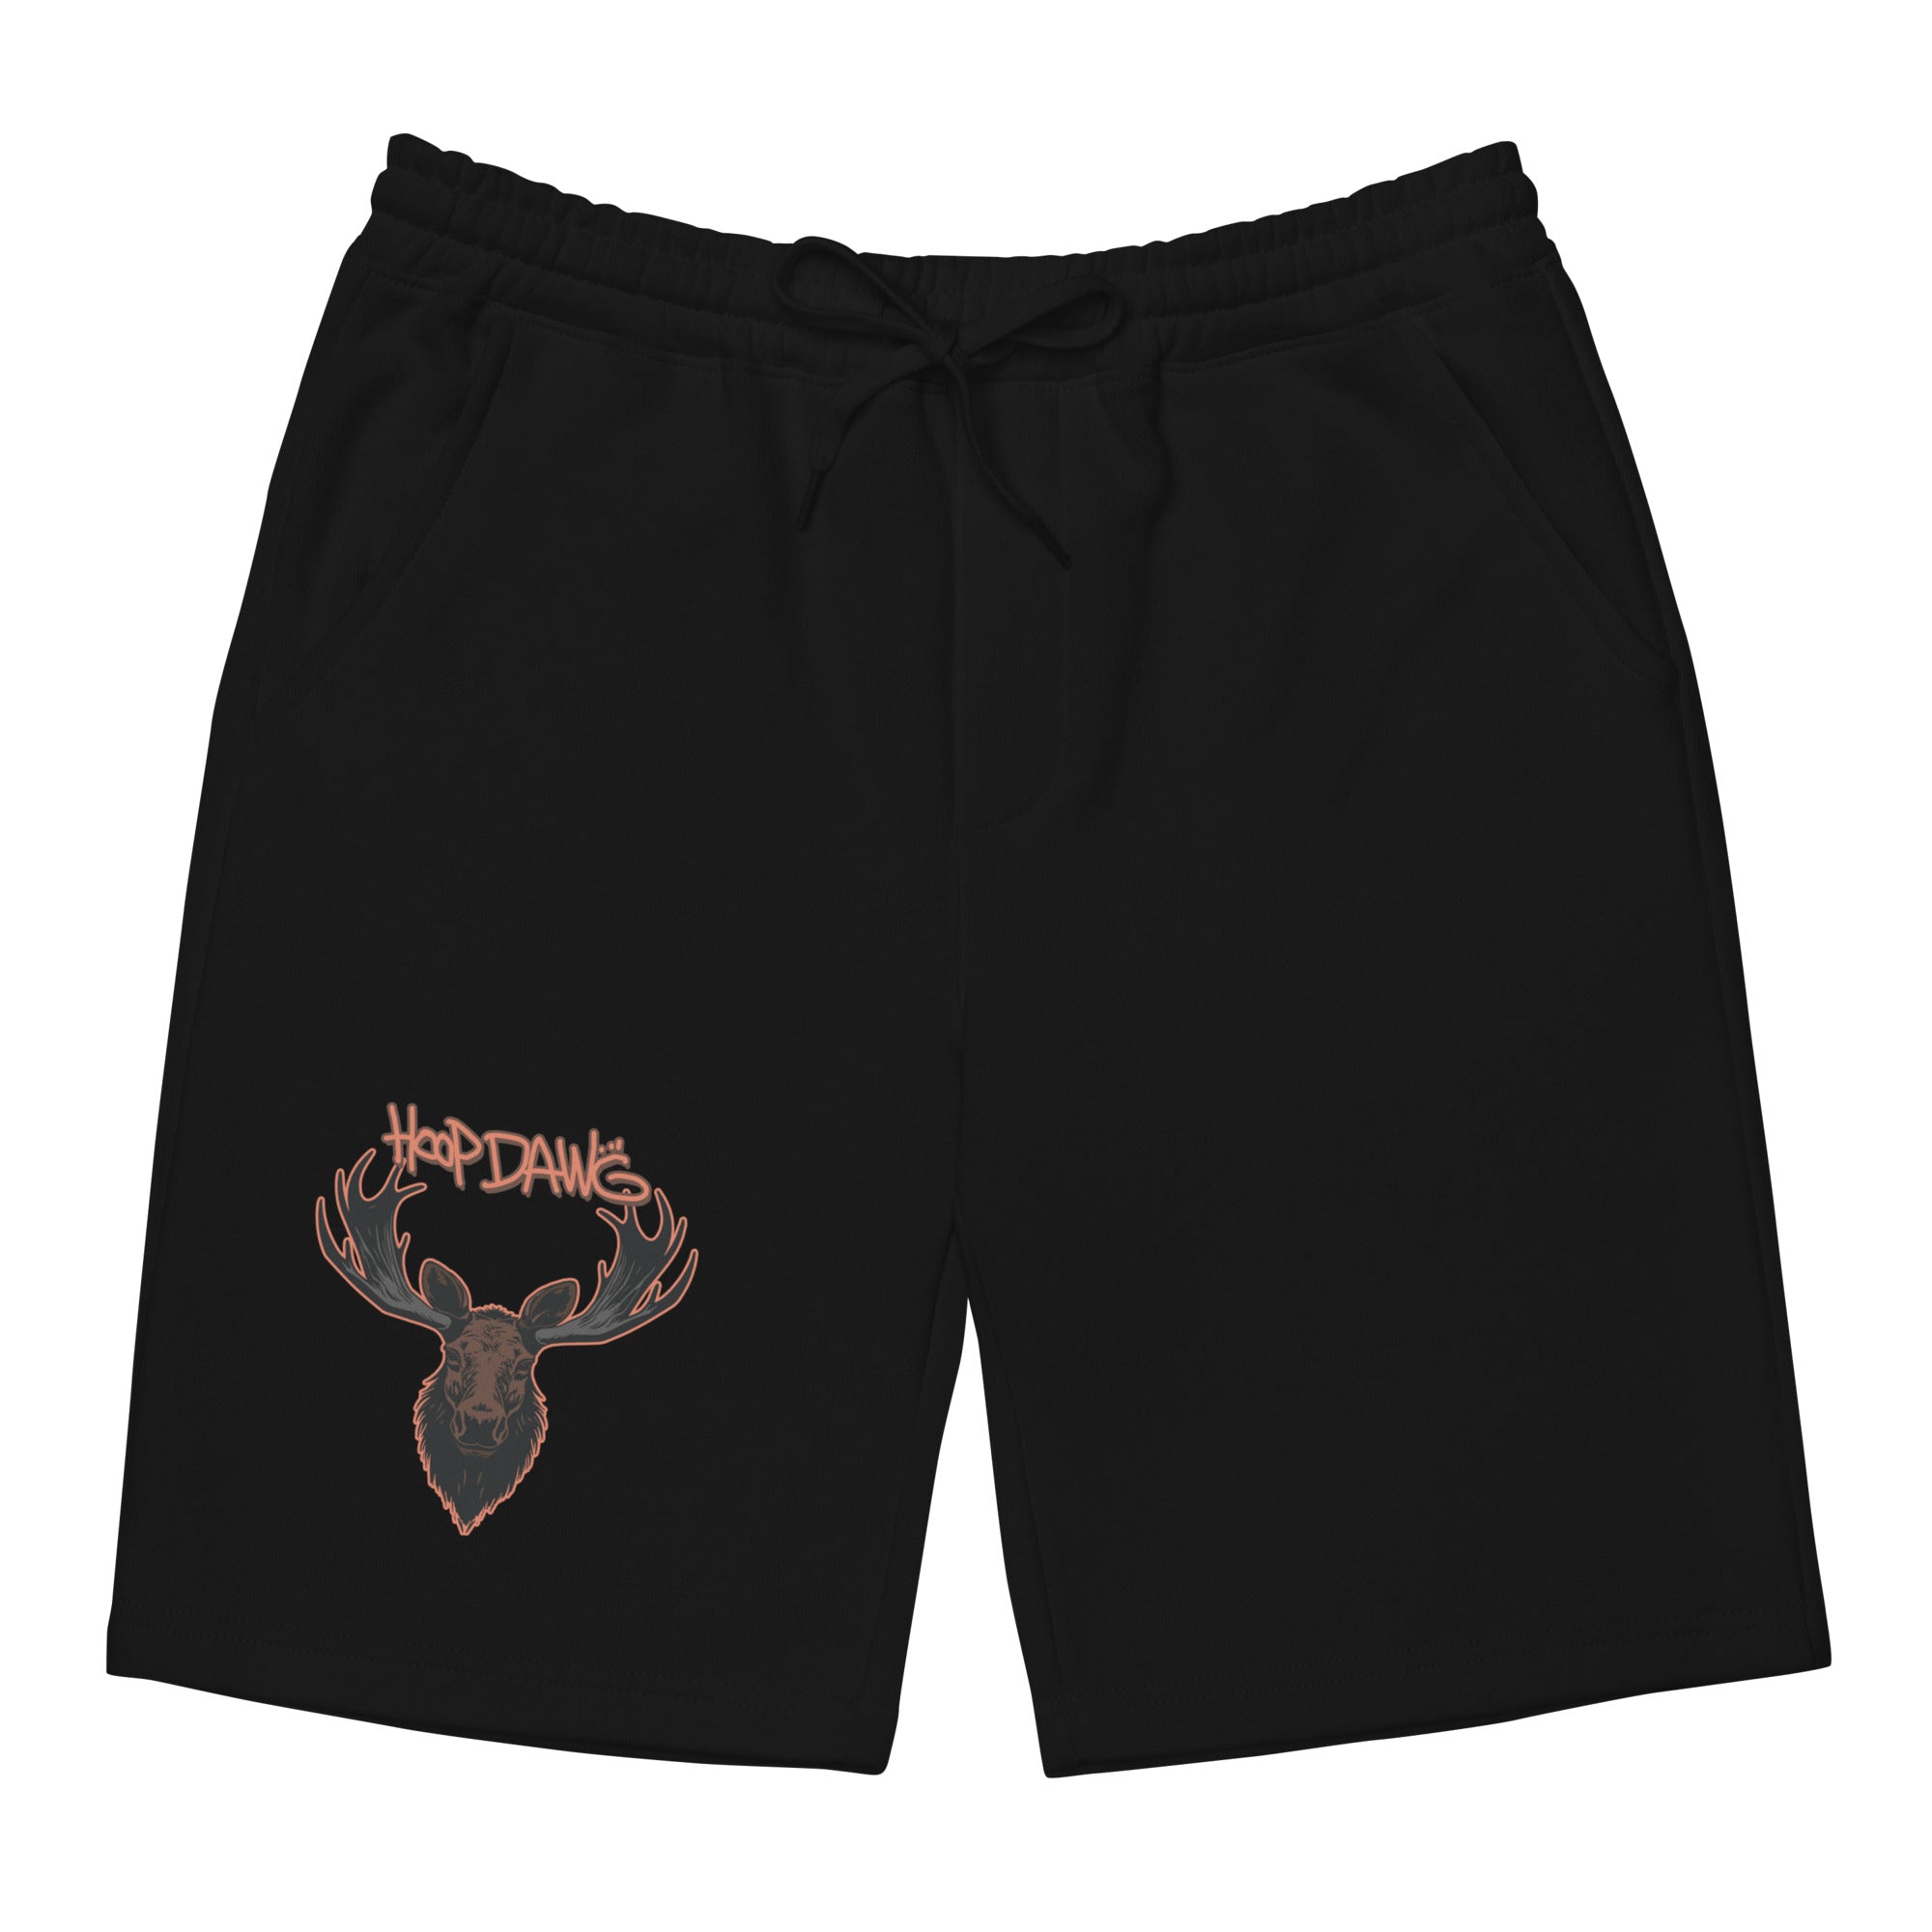 LIMITED "Hoop" shorts